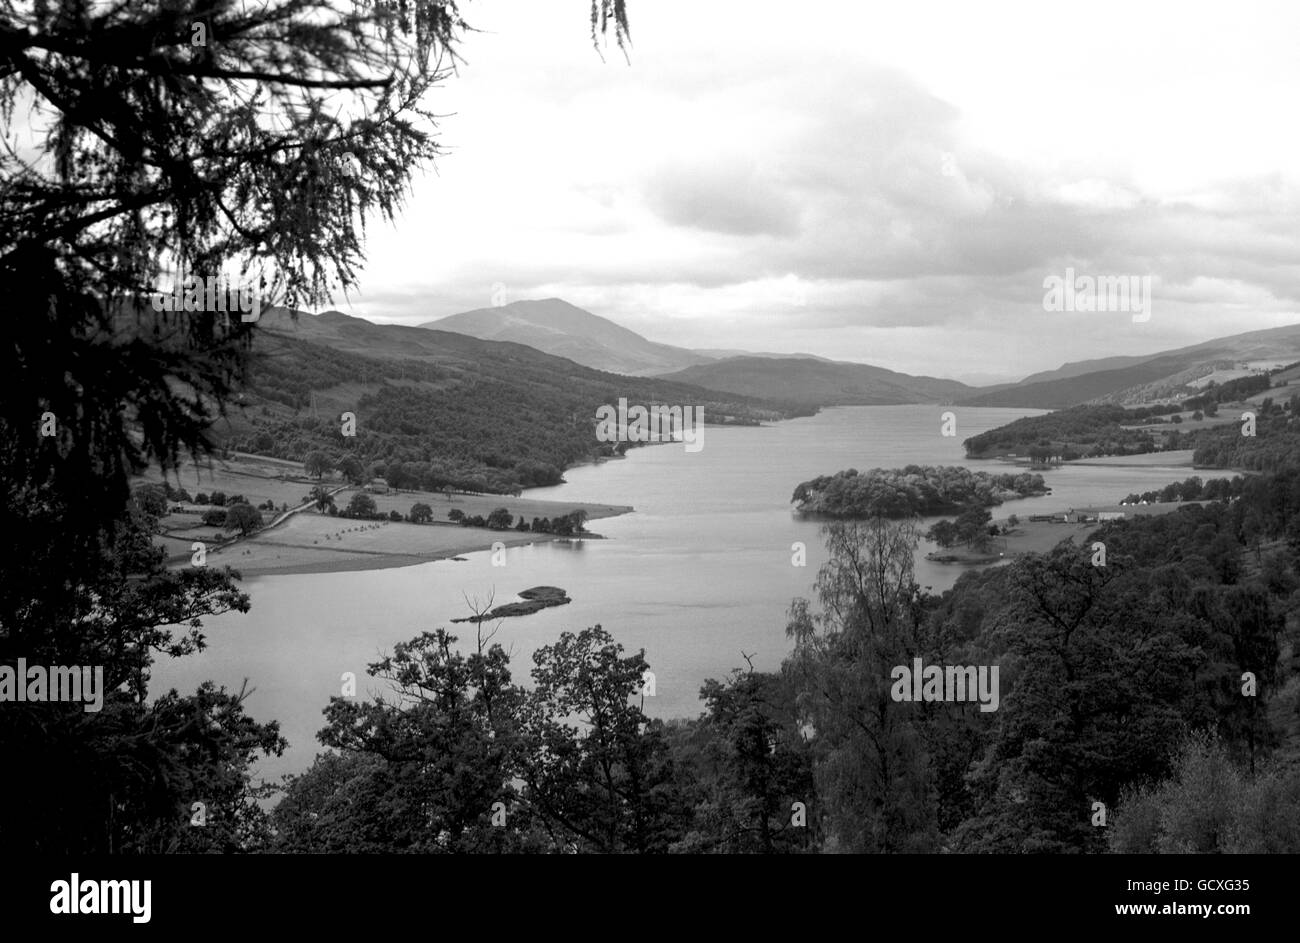 Buildings and Landmarks - Loch Tummel. Loch Tummel, north west of Pitlochry in Perth and Kinross, Scotland. Stock Photo